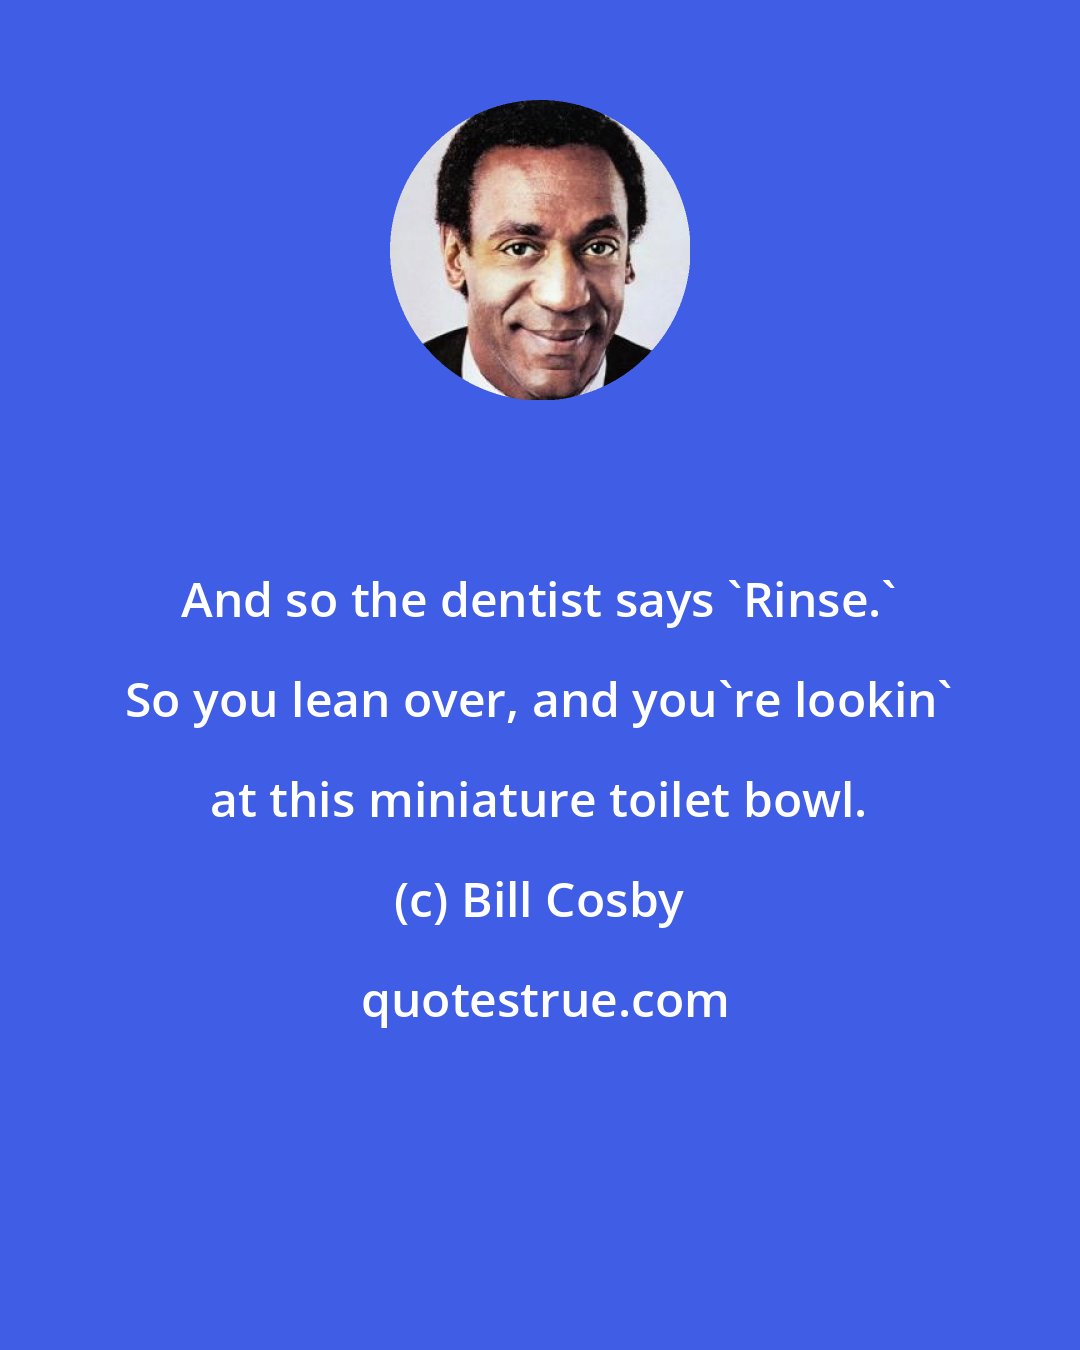 Bill Cosby: And so the dentist says 'Rinse.' So you lean over, and you're lookin' at this miniature toilet bowl.